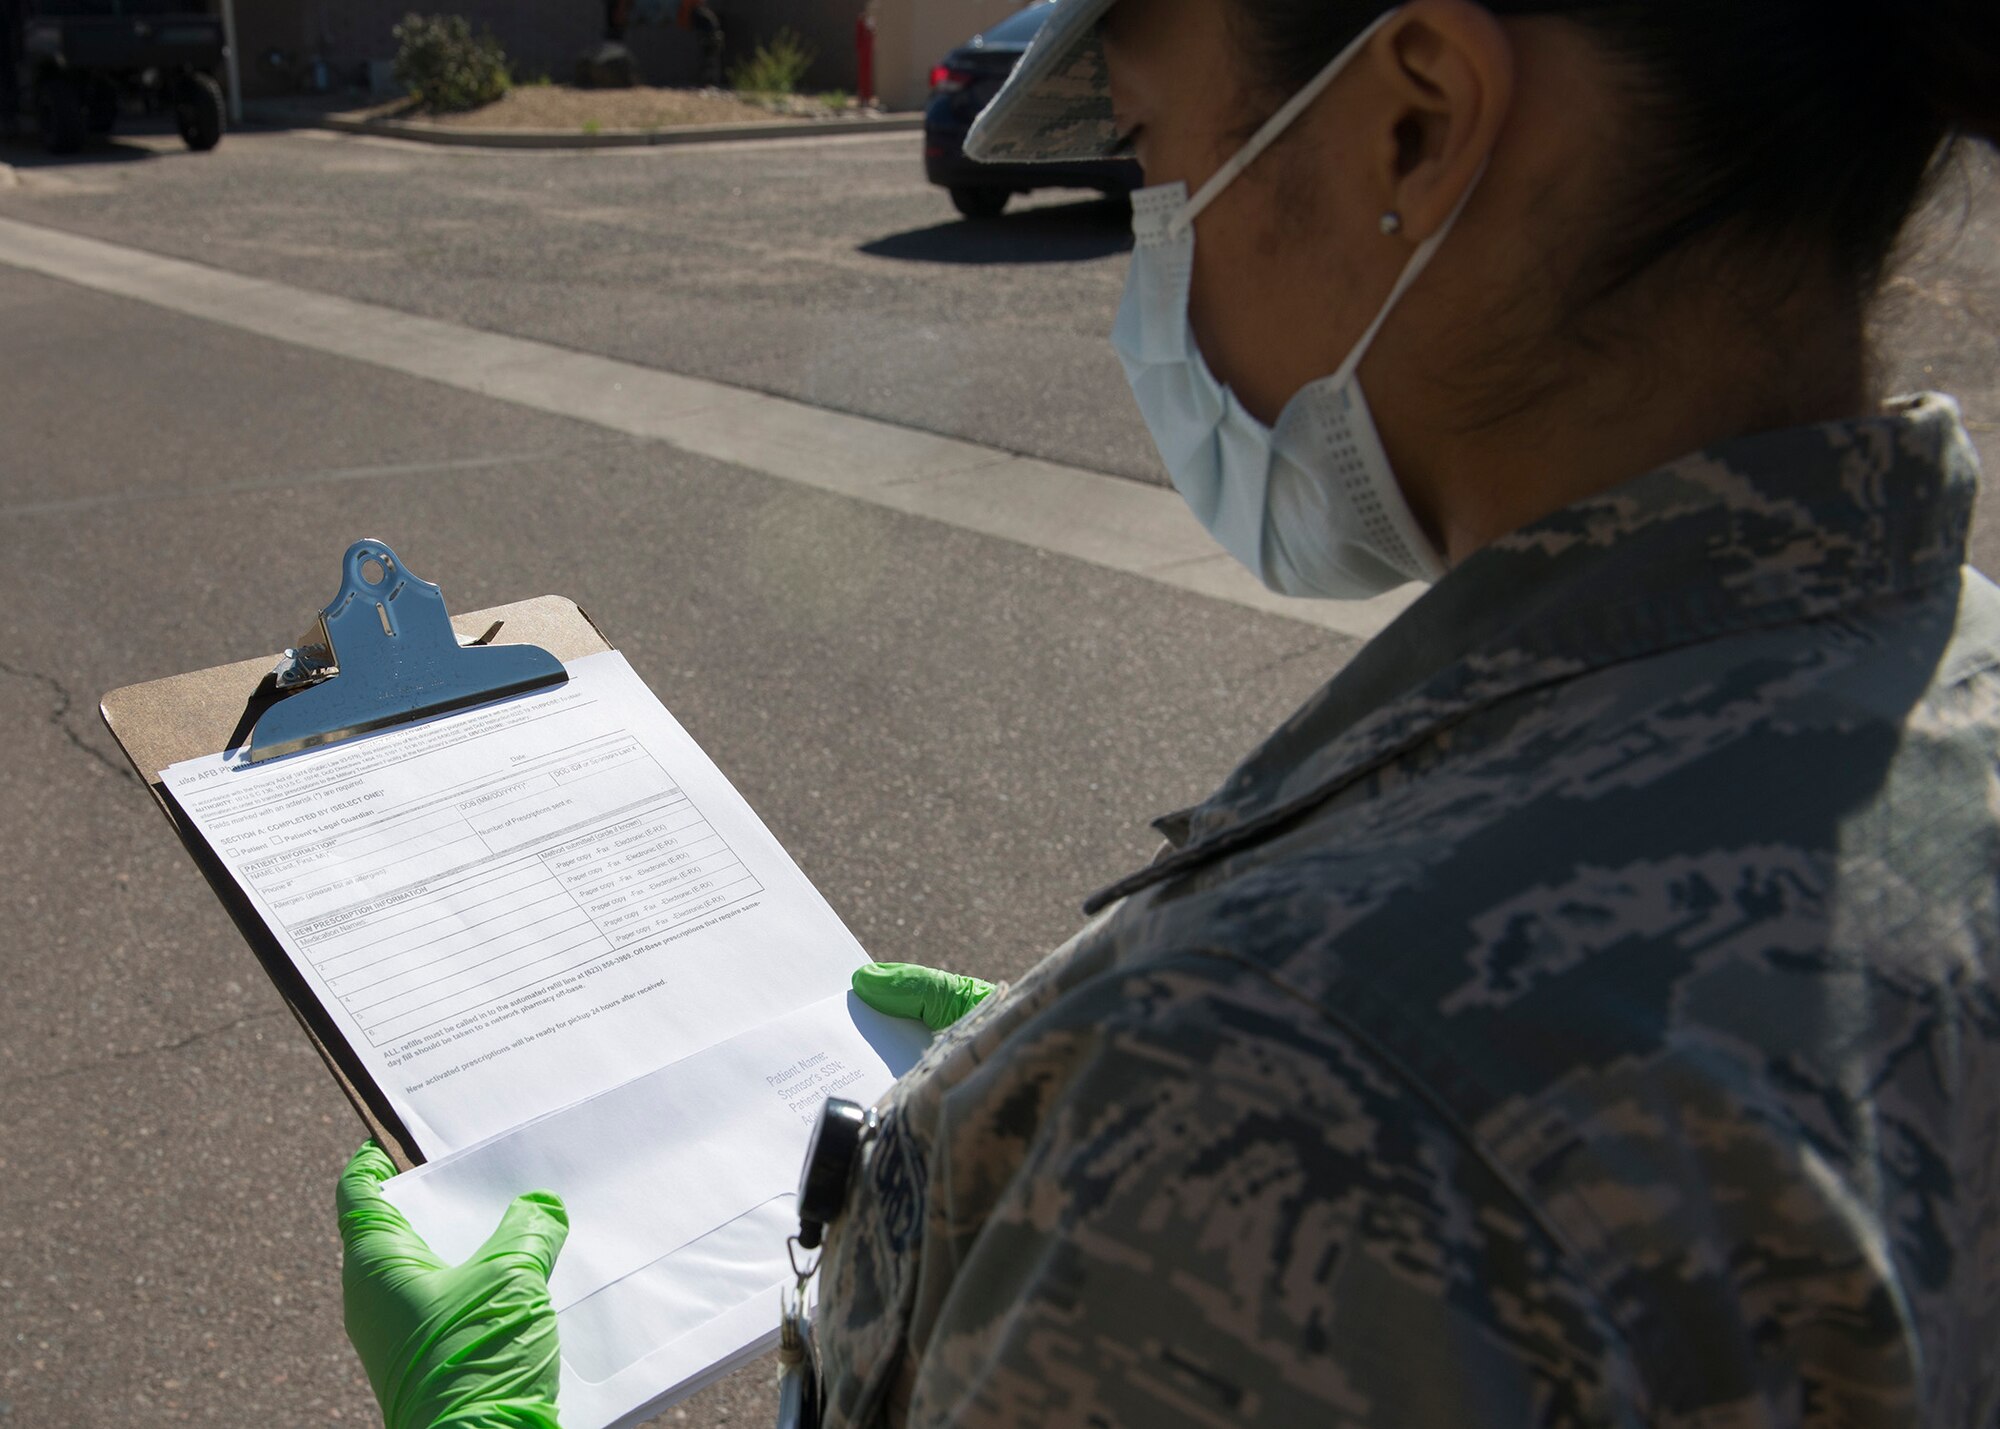 Airman 1st Class Erika Tolentino, 56th Medical Group pharmacy technician, prepares to fill a prescription activation form March 26, 2020, at Luke Air Force Base, Ariz.